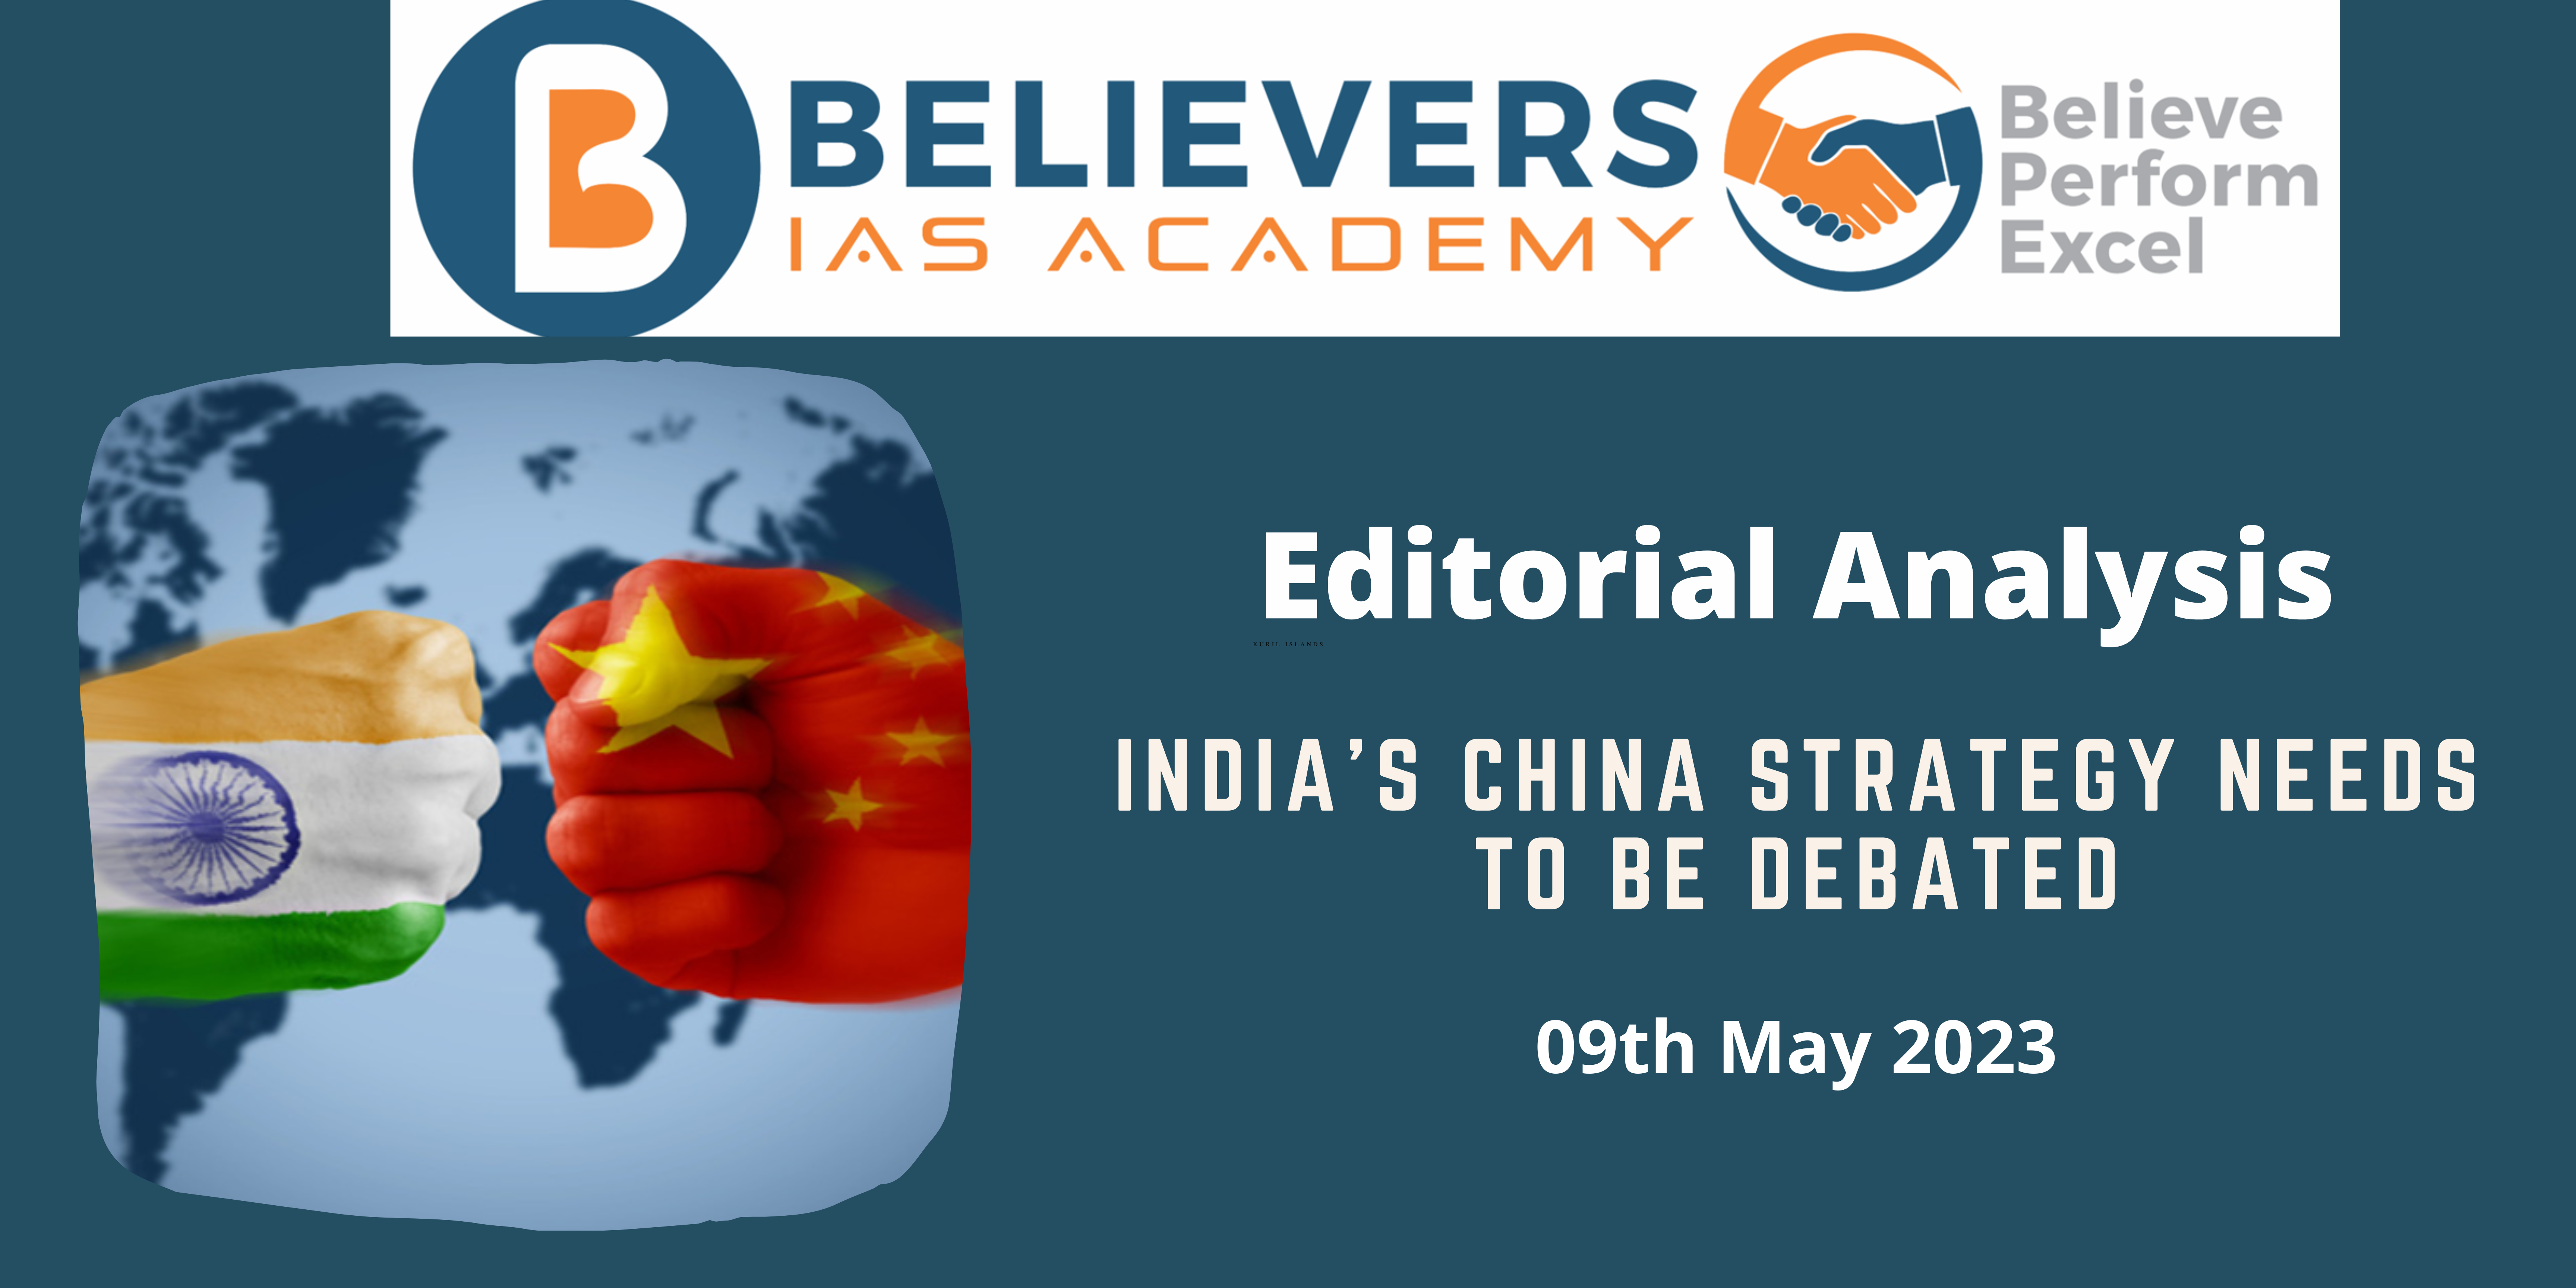 India’s China Strategy Needs To Be Debated